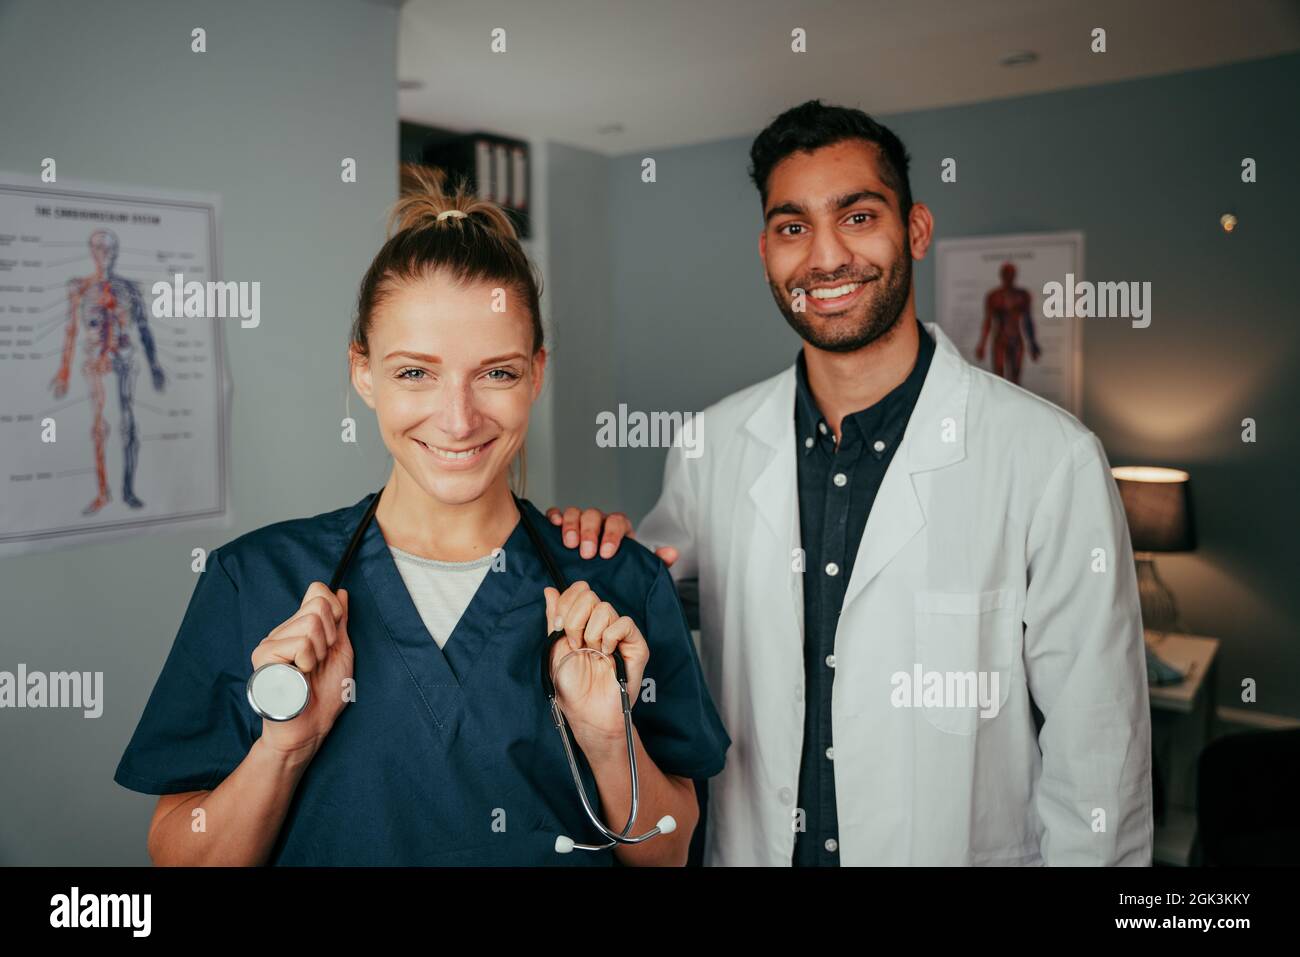 Caucasian female nurse standing with mixed race male surgeon Stock Photo